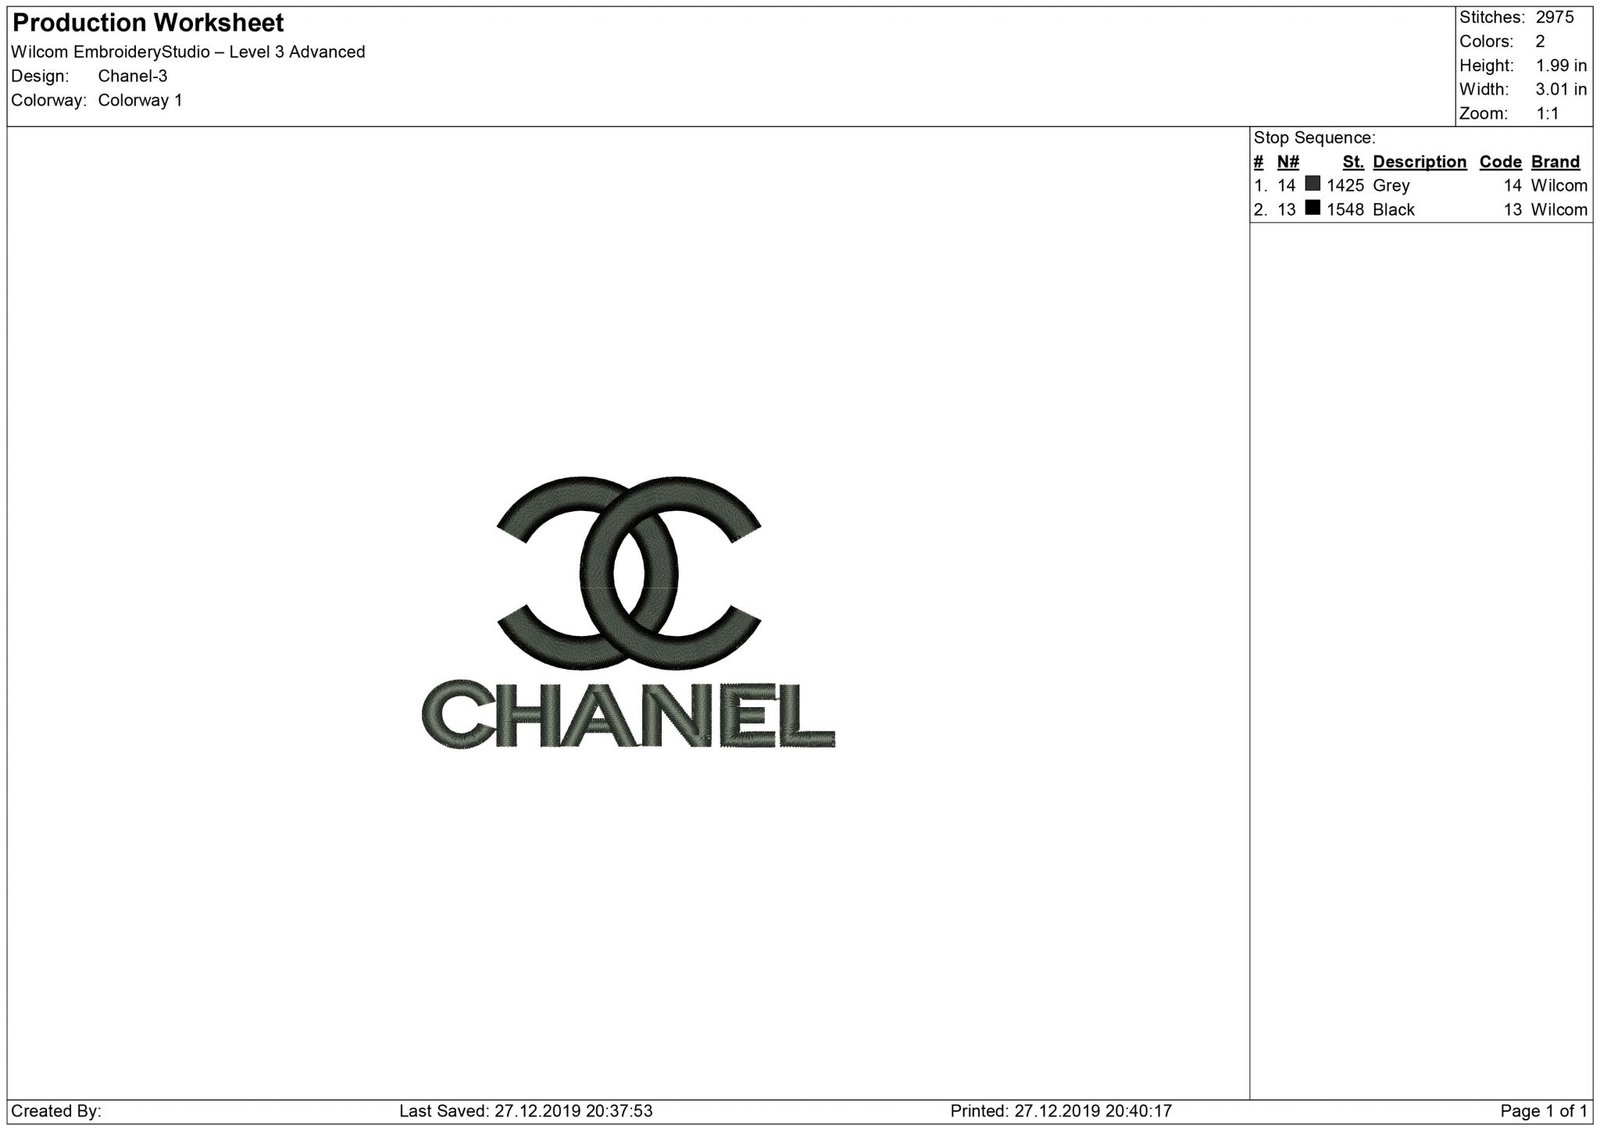 Chanel logo embroidery design - pattern for embroidery machine